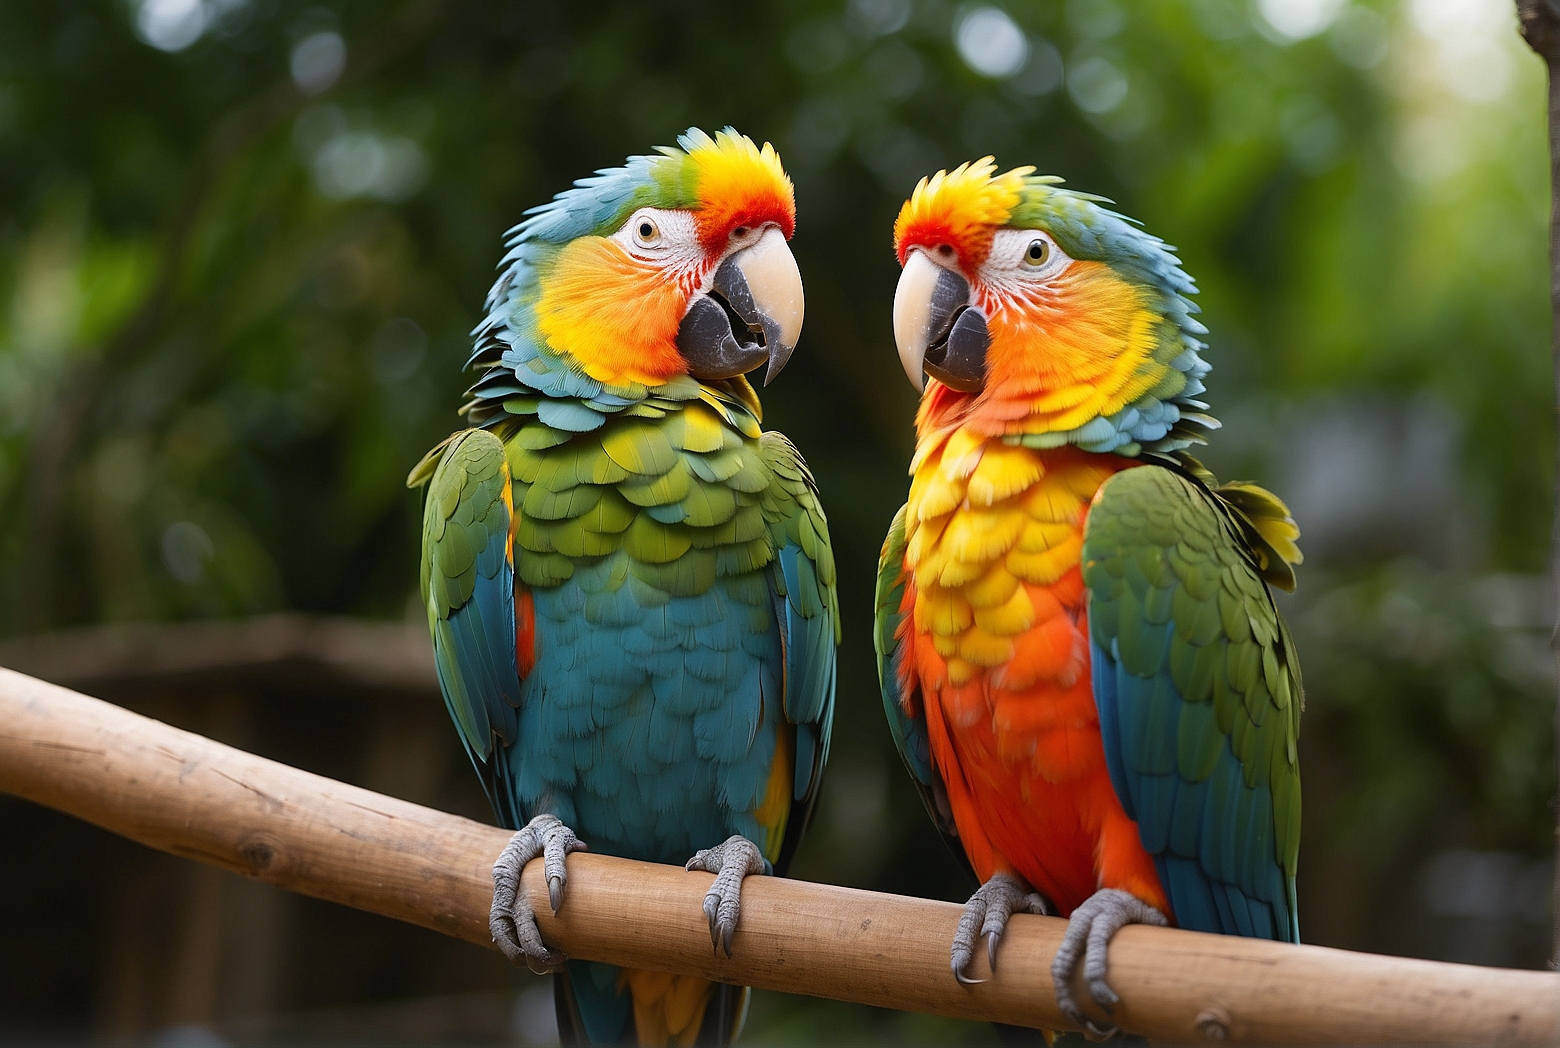 Why Do Some Parrots Have the Ability to Speak?